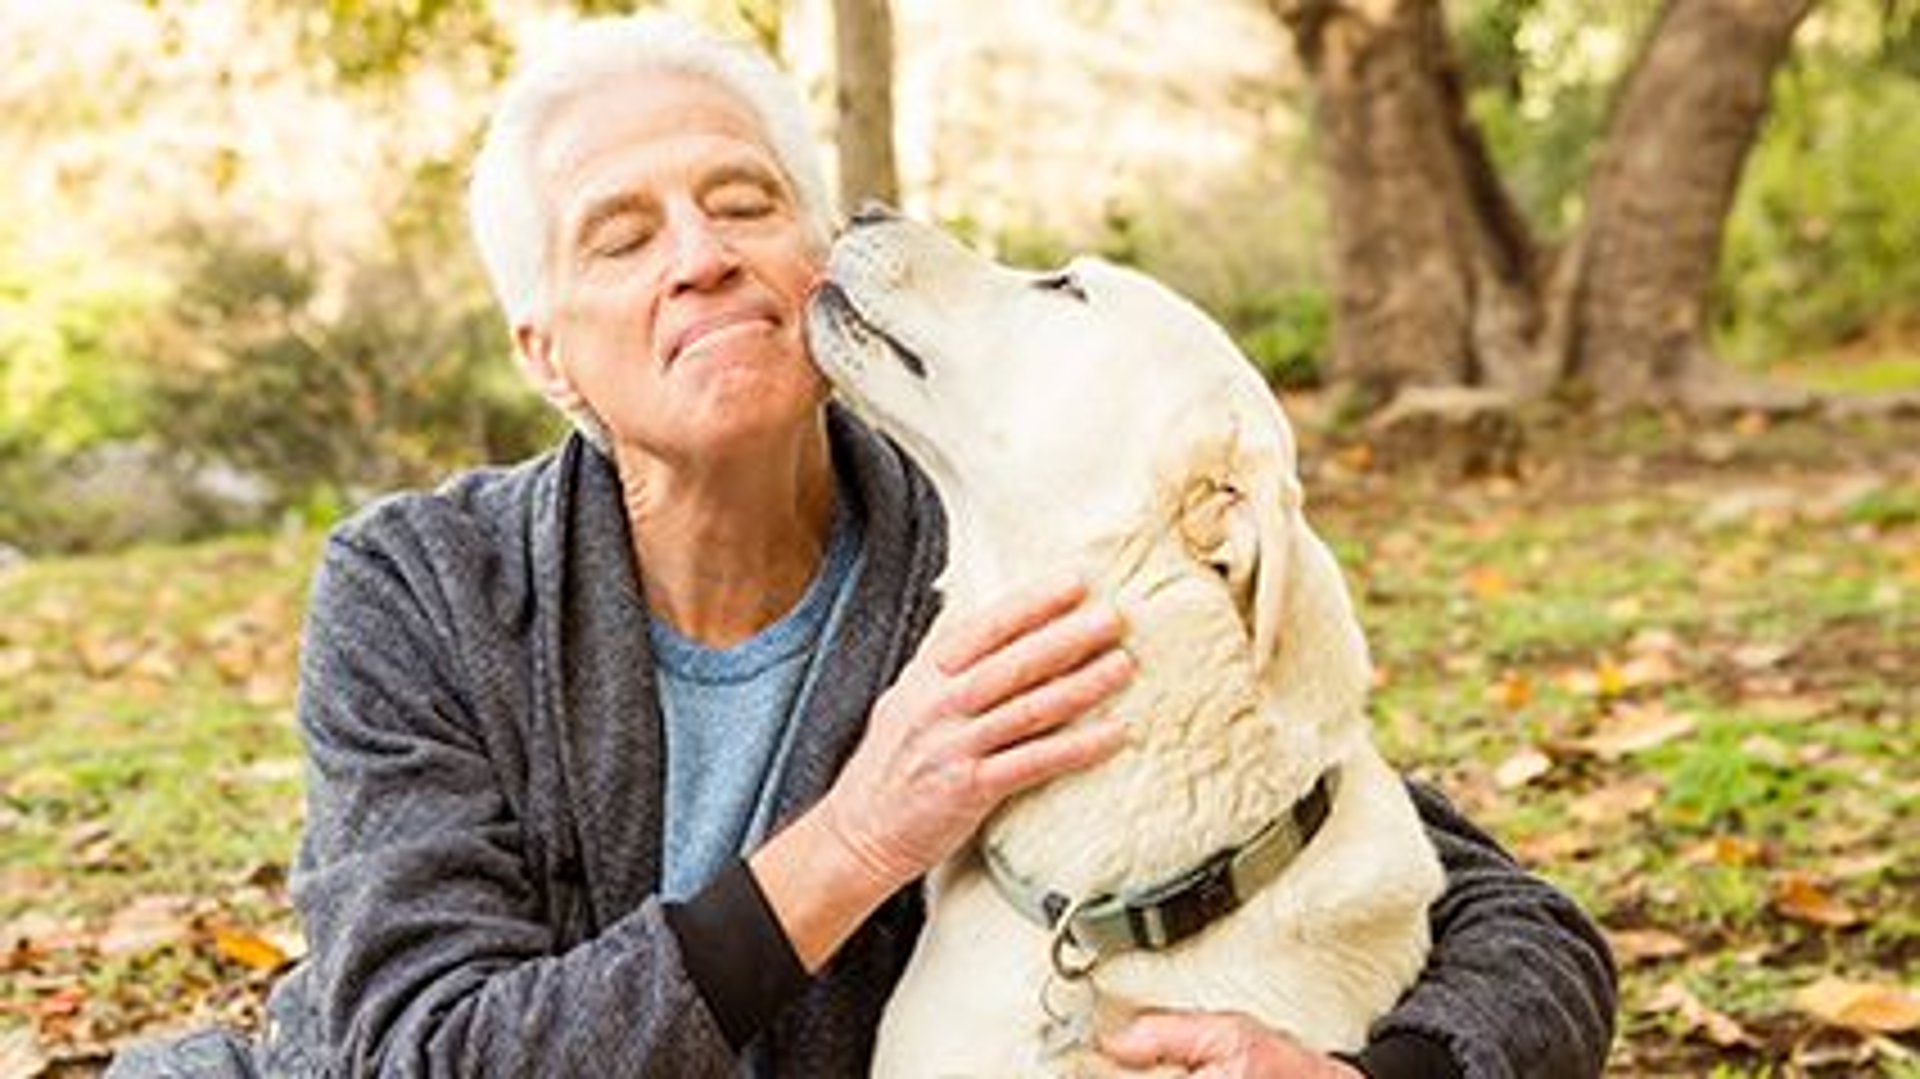 Dogs and Their Humans Share Same Diabetes Risk: Study thumbnail